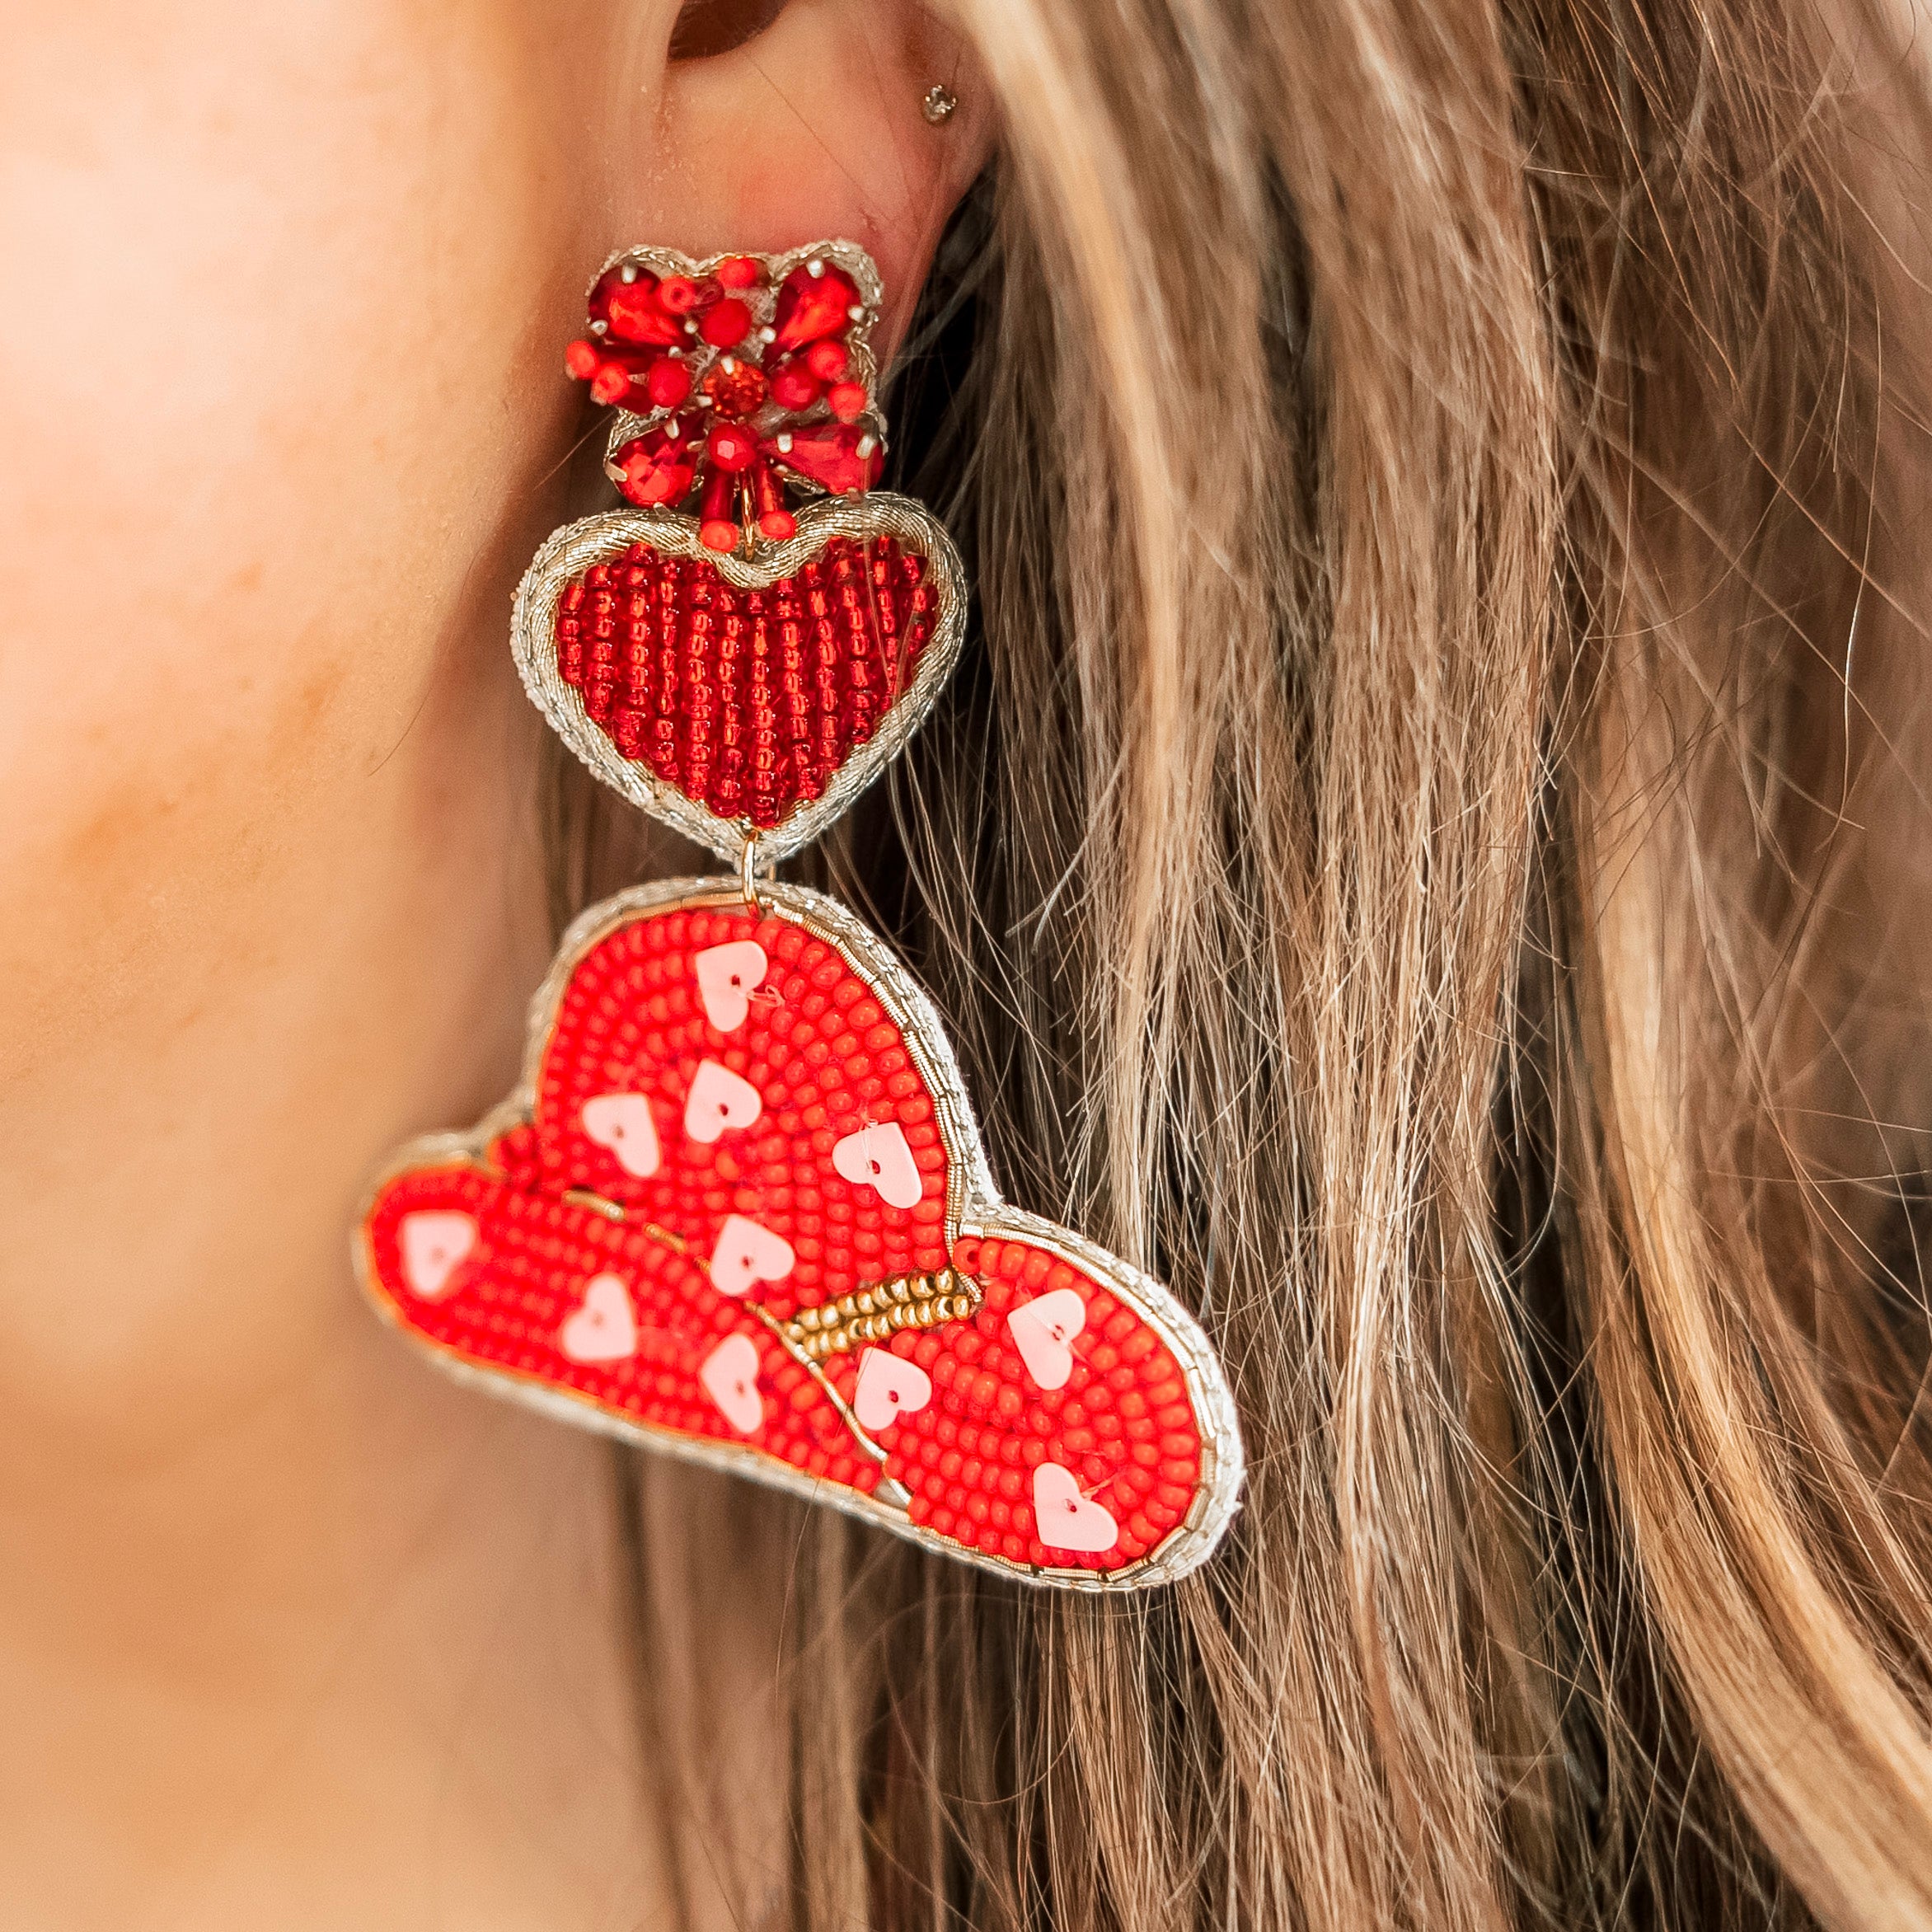 Beaded Heart and Cowboy Hat Earrings with Pink Hearts in Red - Giddy Up Glamour Boutique